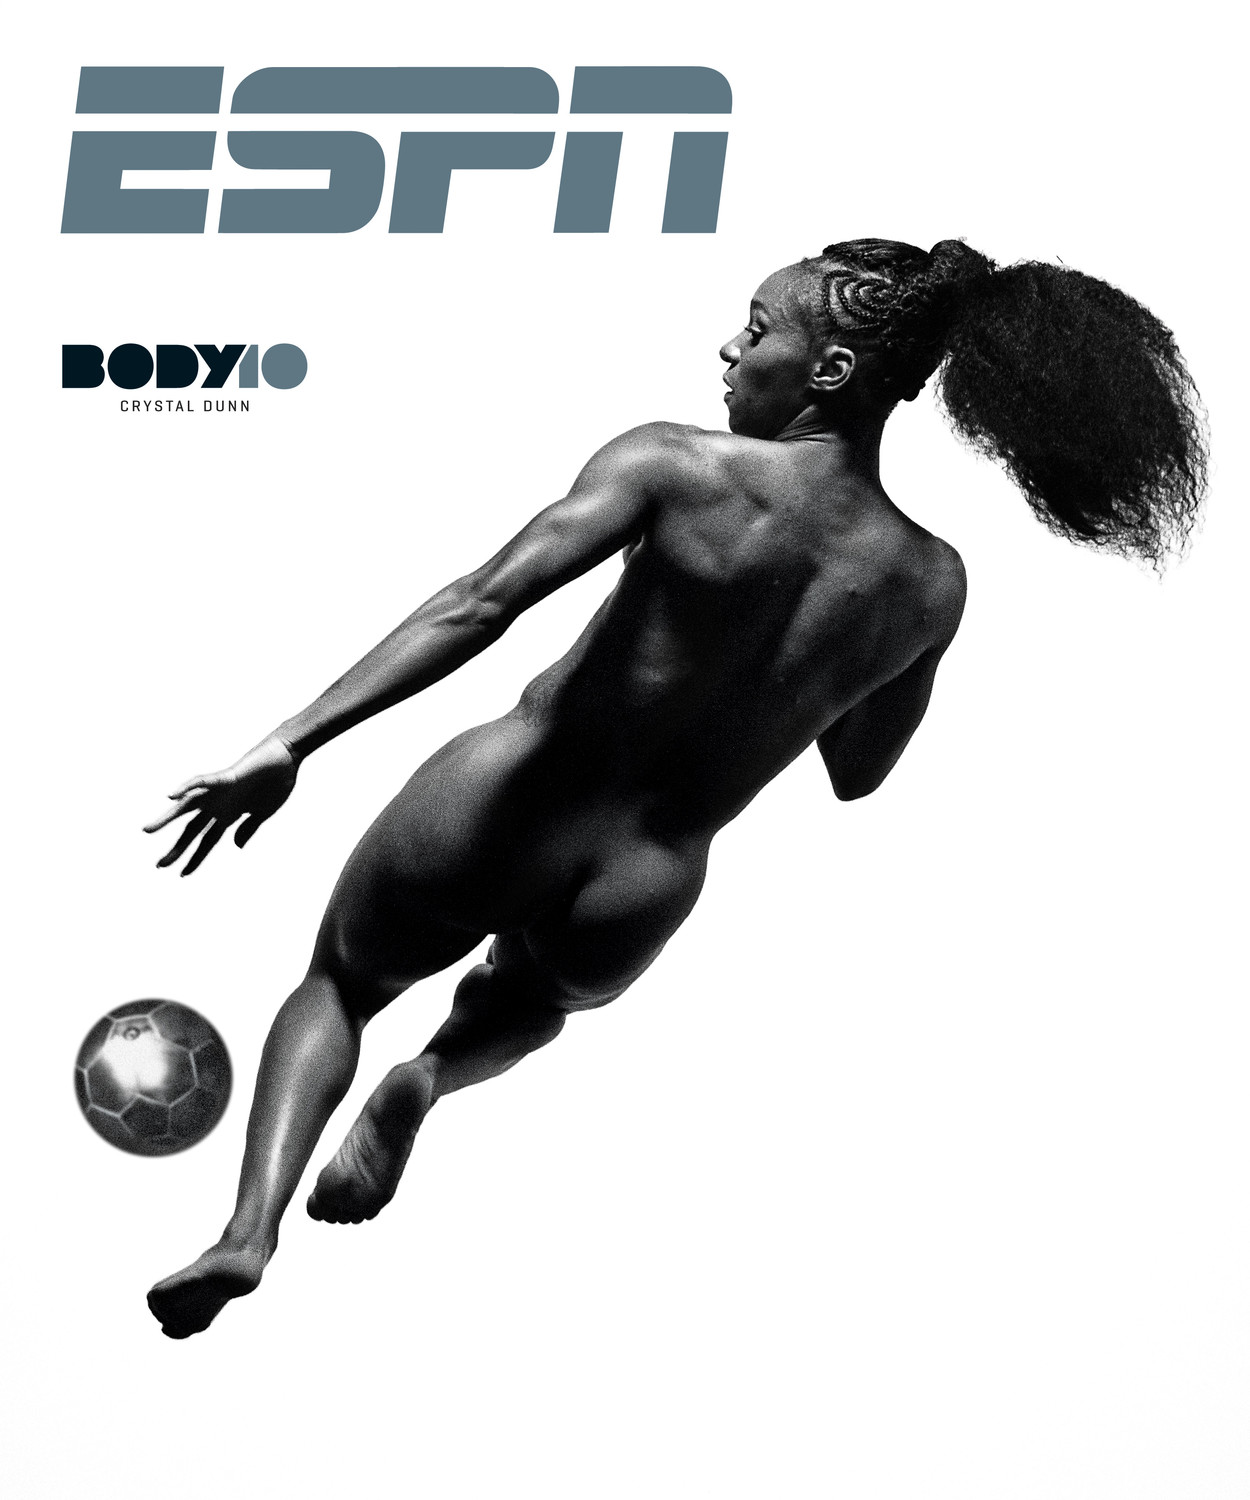 Former South Side High School soccer star Crystal Dunn, a member of the United States Women’s National Team, was one of 16 athletes to appear naked in ESPN the Magazine’s 2018 Body Issue. She was featured on one version of the magazine’s cover.